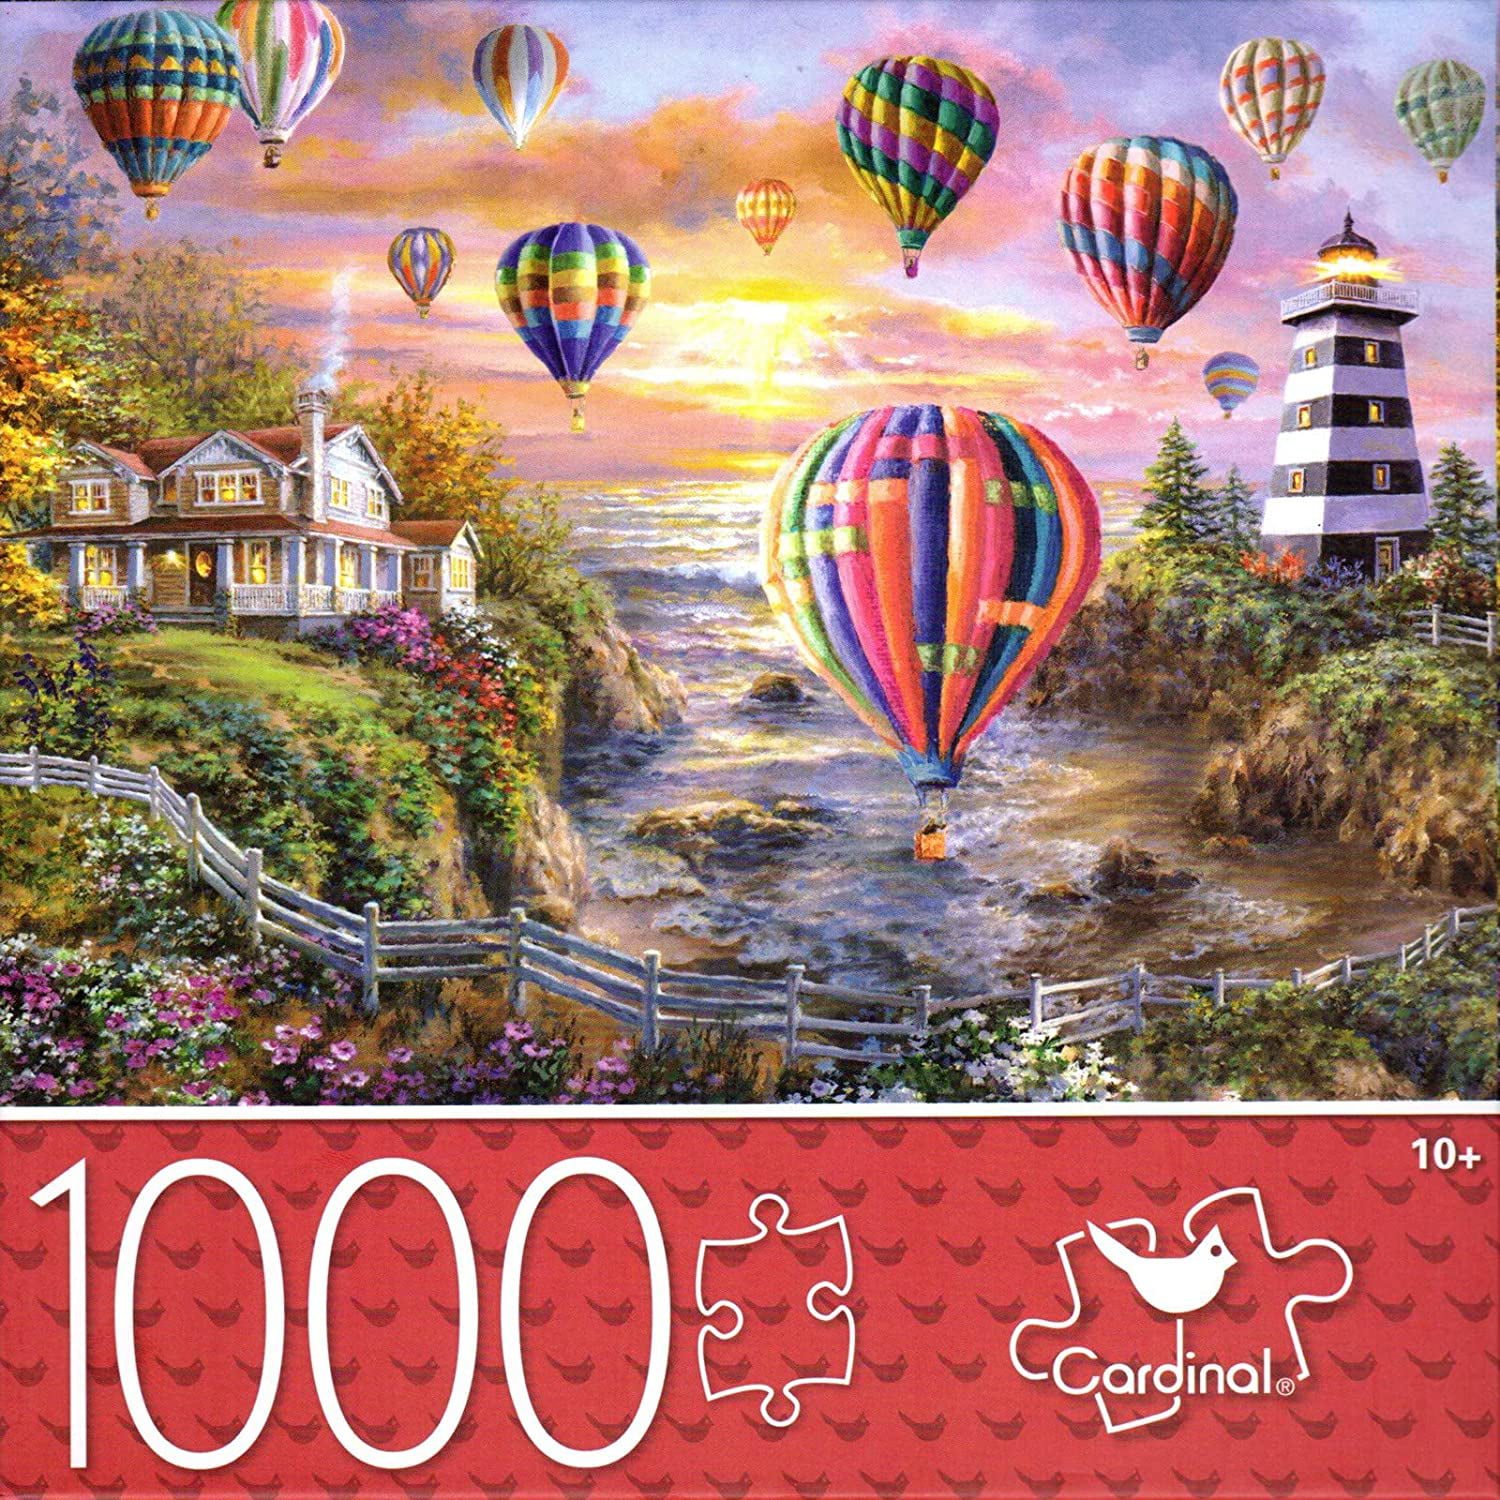 Adult Jigsaw Puzzle 4000 Pieces Adult Jigsaw Piece 4000 Piece Urban Hot Air Balloon 4000 Piece Jigsaw Puzzle Large Piece Jigsaw Puzzle Kids Educational Game Toys Home Wall Decoration Gifts